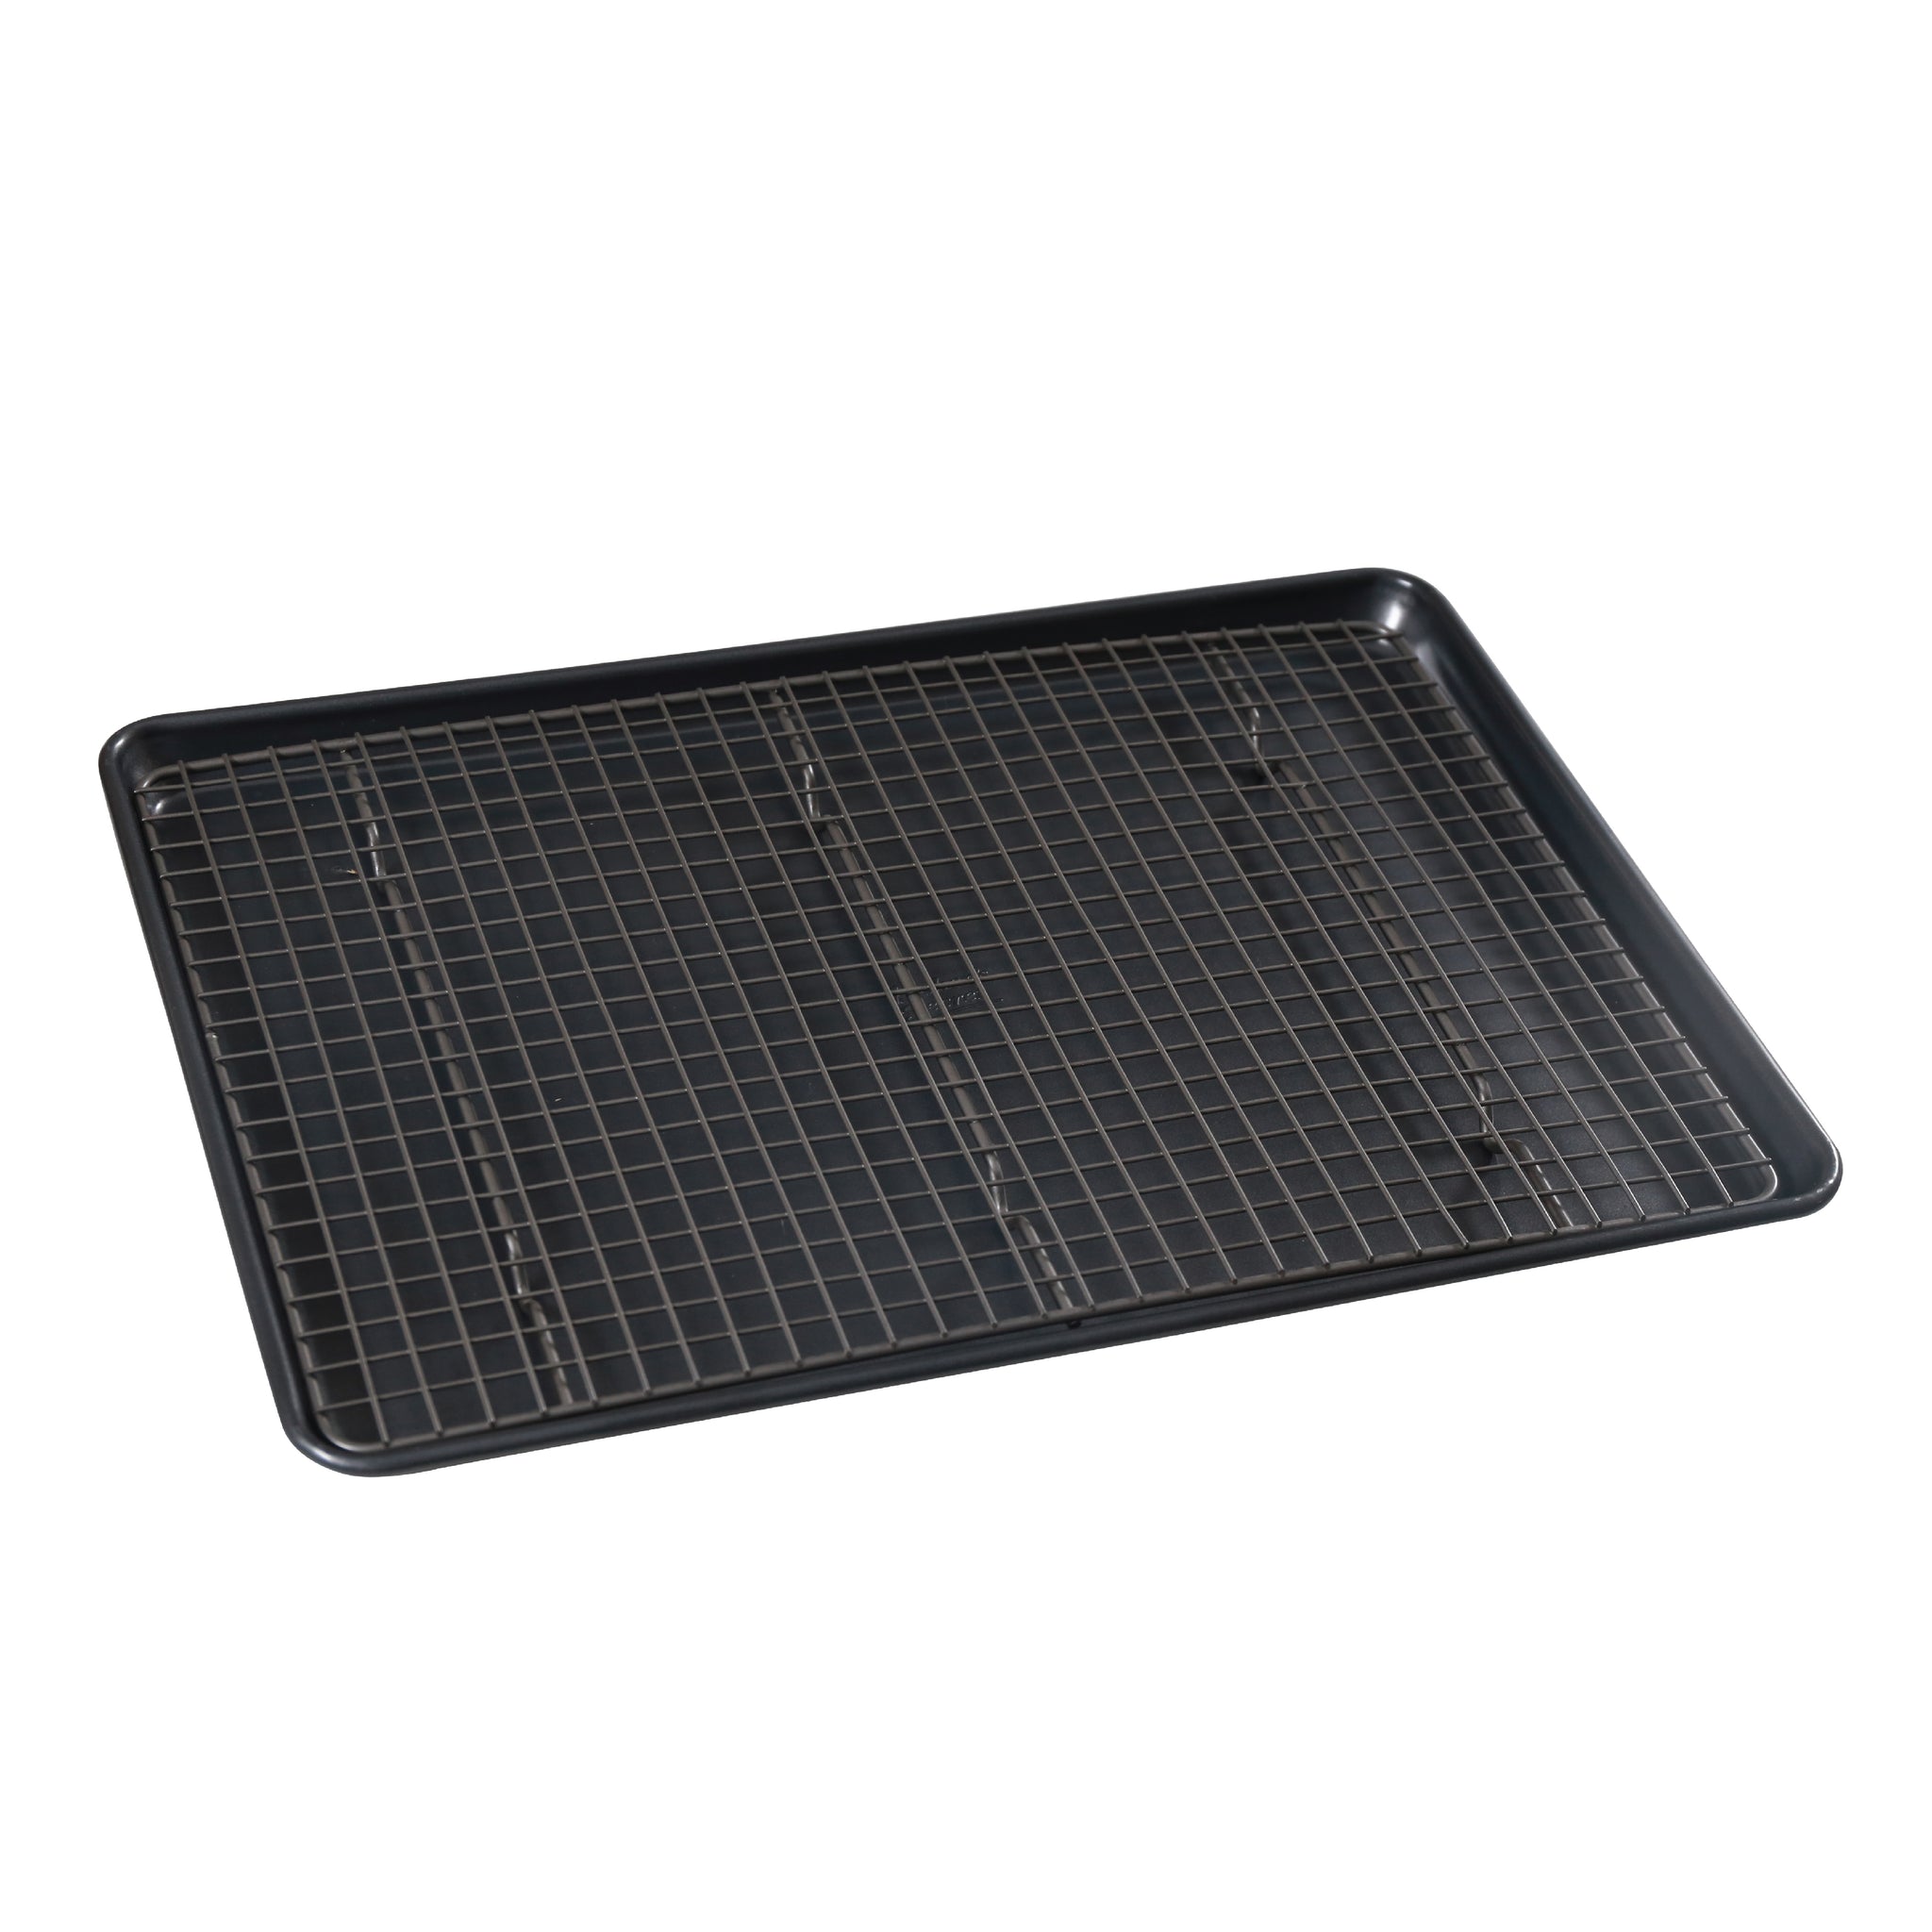 Review of #BAKER'S SECRET Pure Aluminum Insulated Cookie Sheet by Cheyenne,  135 votes